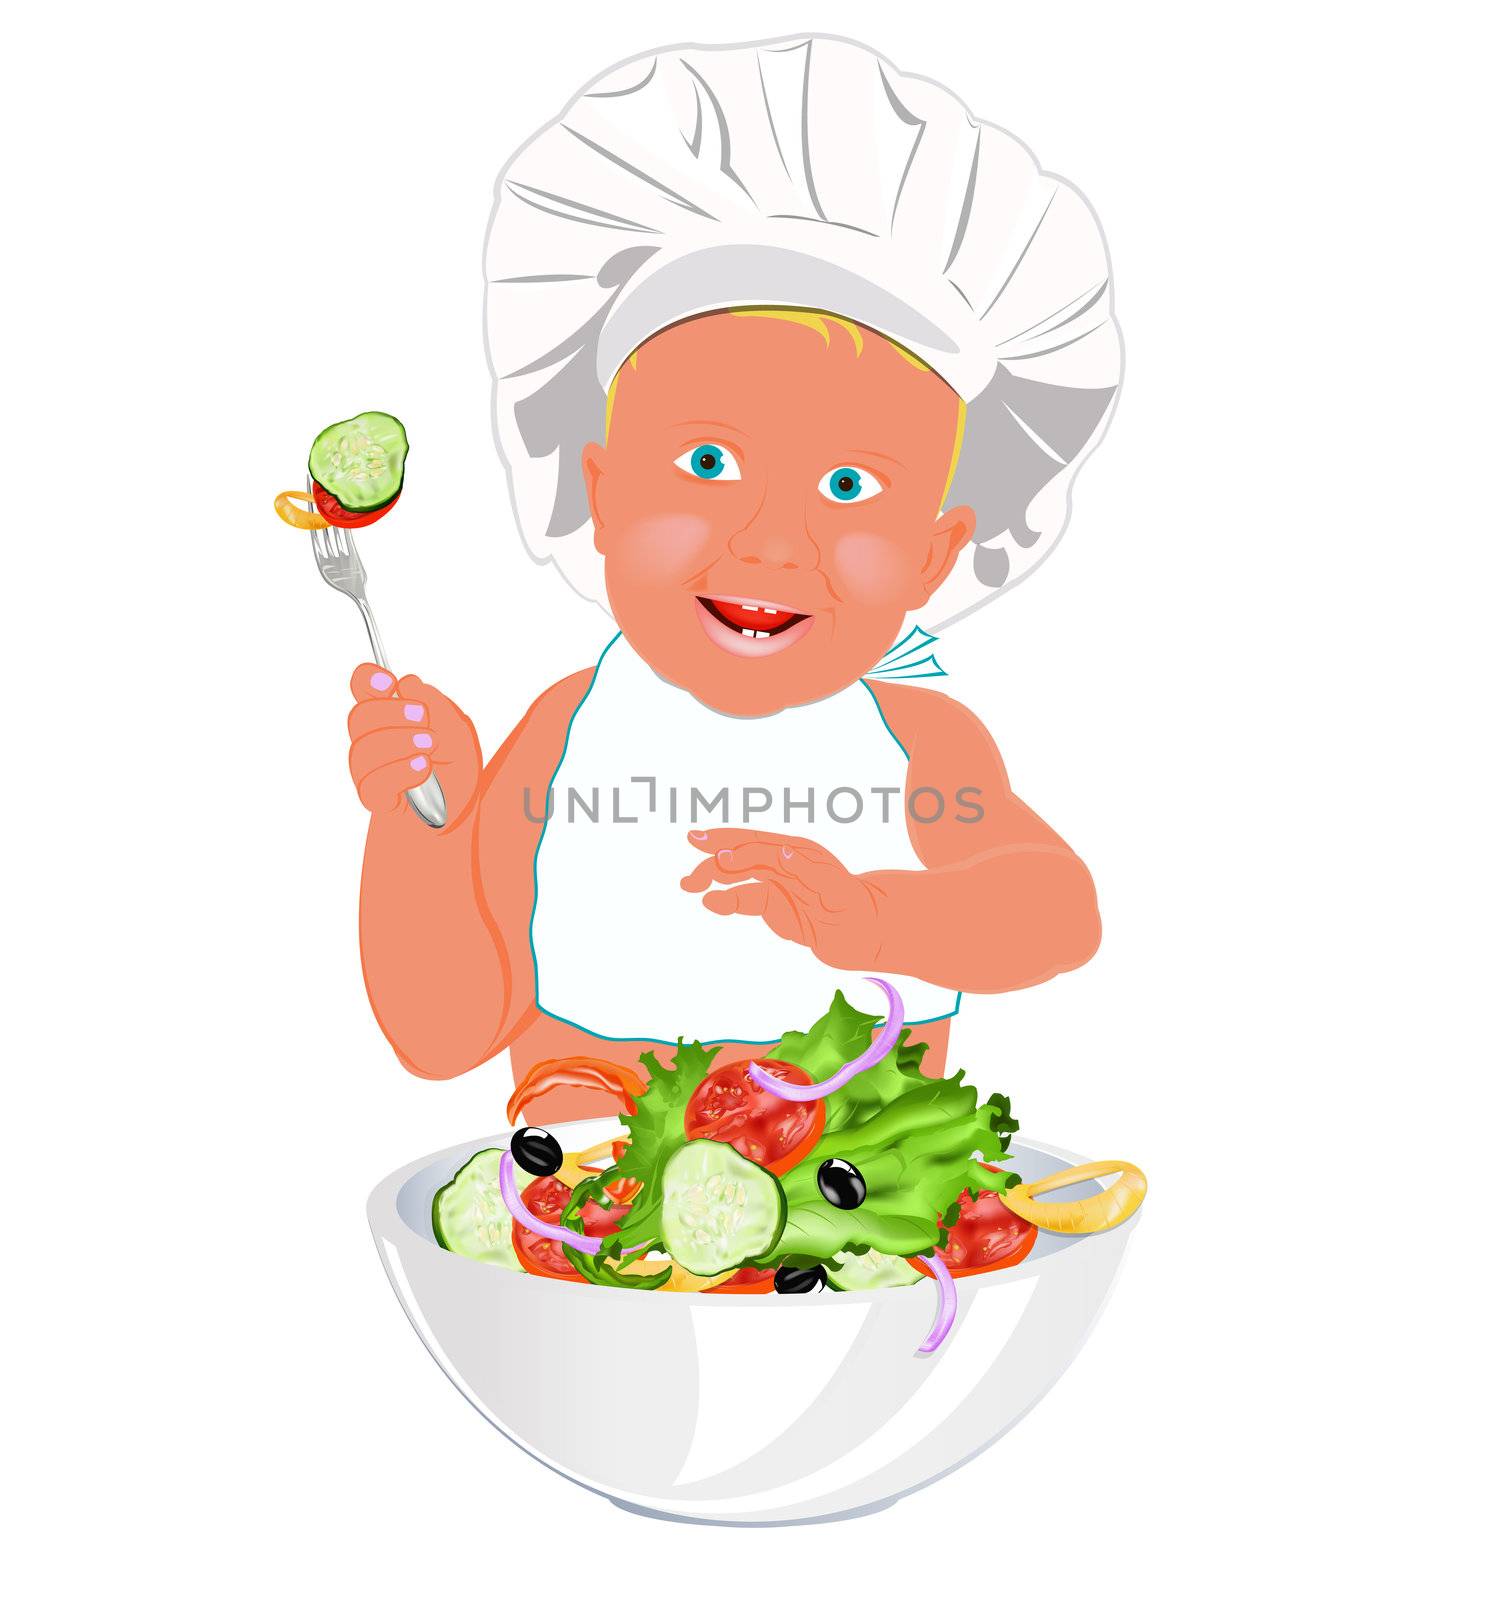 Chef Child and fresh vegetable salad by sergey150770SV